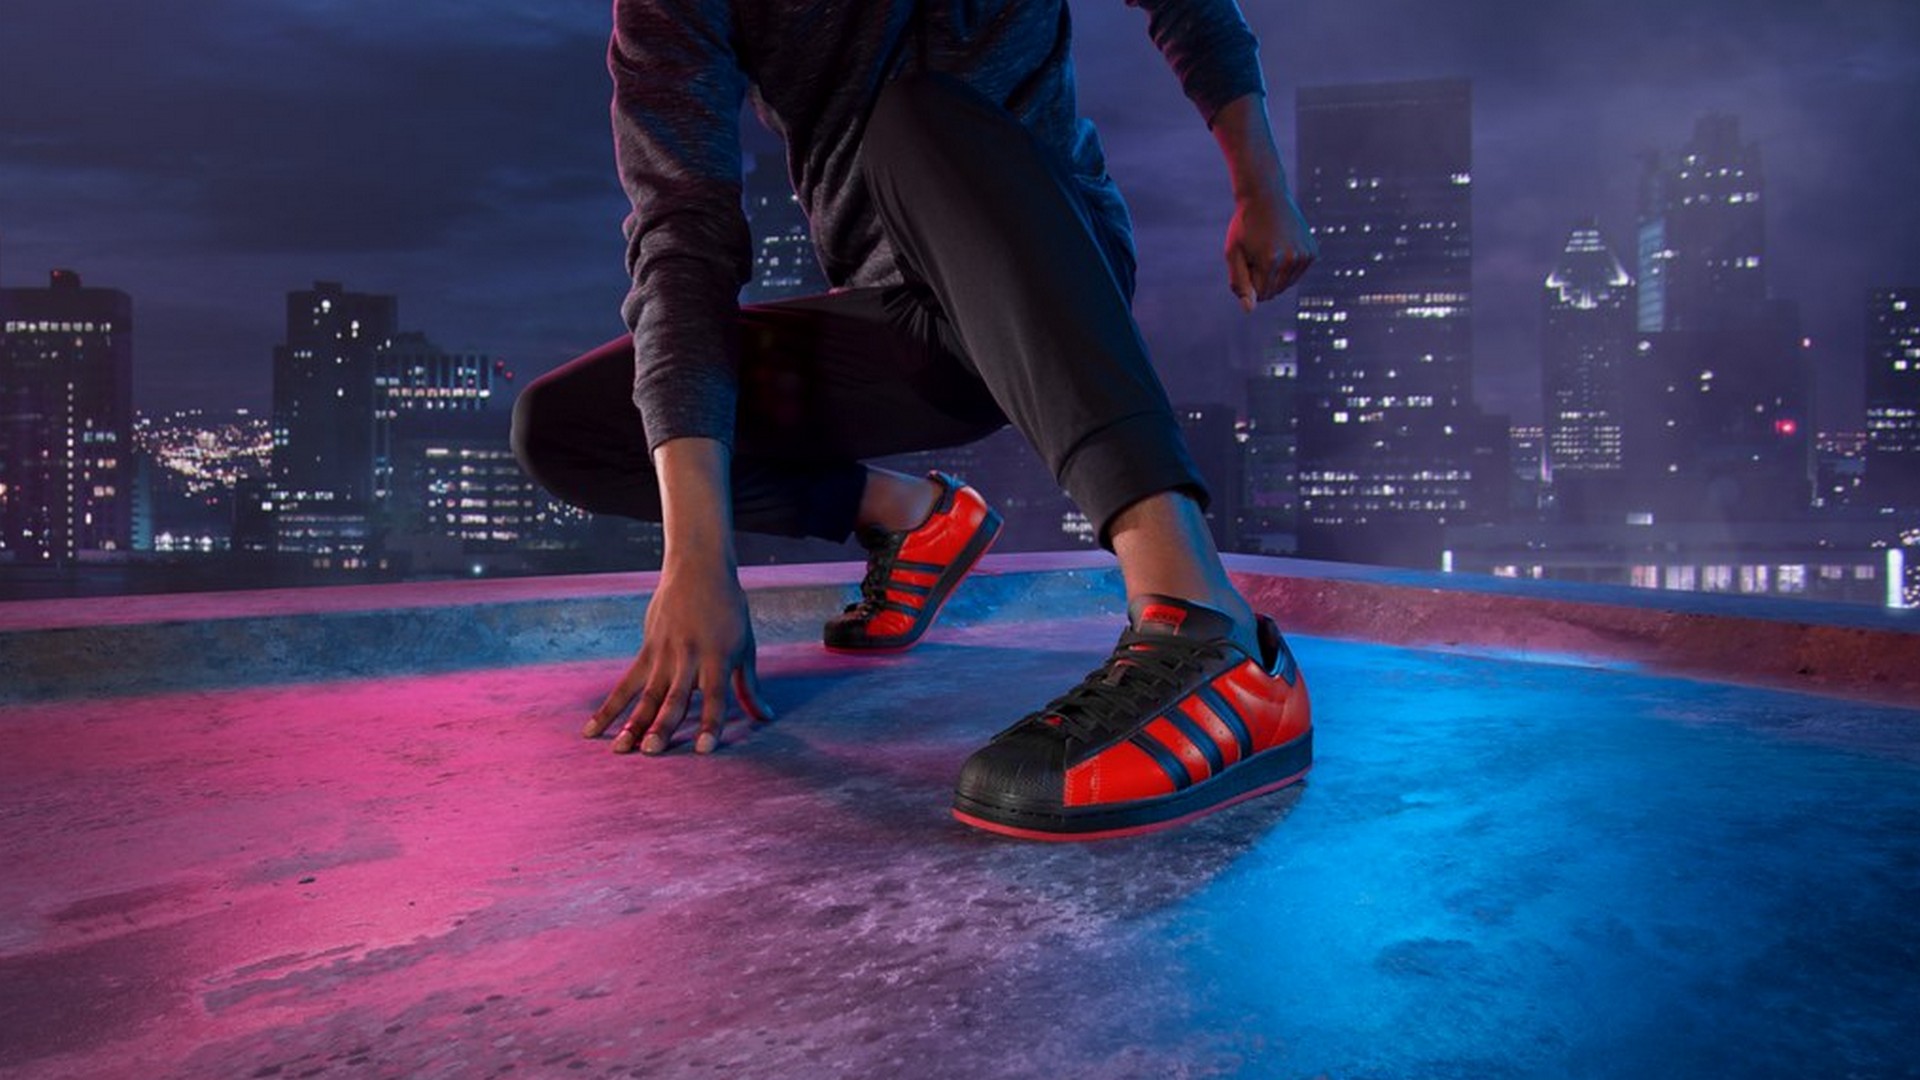 PlayStation Announces Adidas x Marvel's Spider-Man: Miles Morales  Collaboration - PlayStation Reveals Marvel's Spider-Man Launch Trailer |  MKAU Gaming